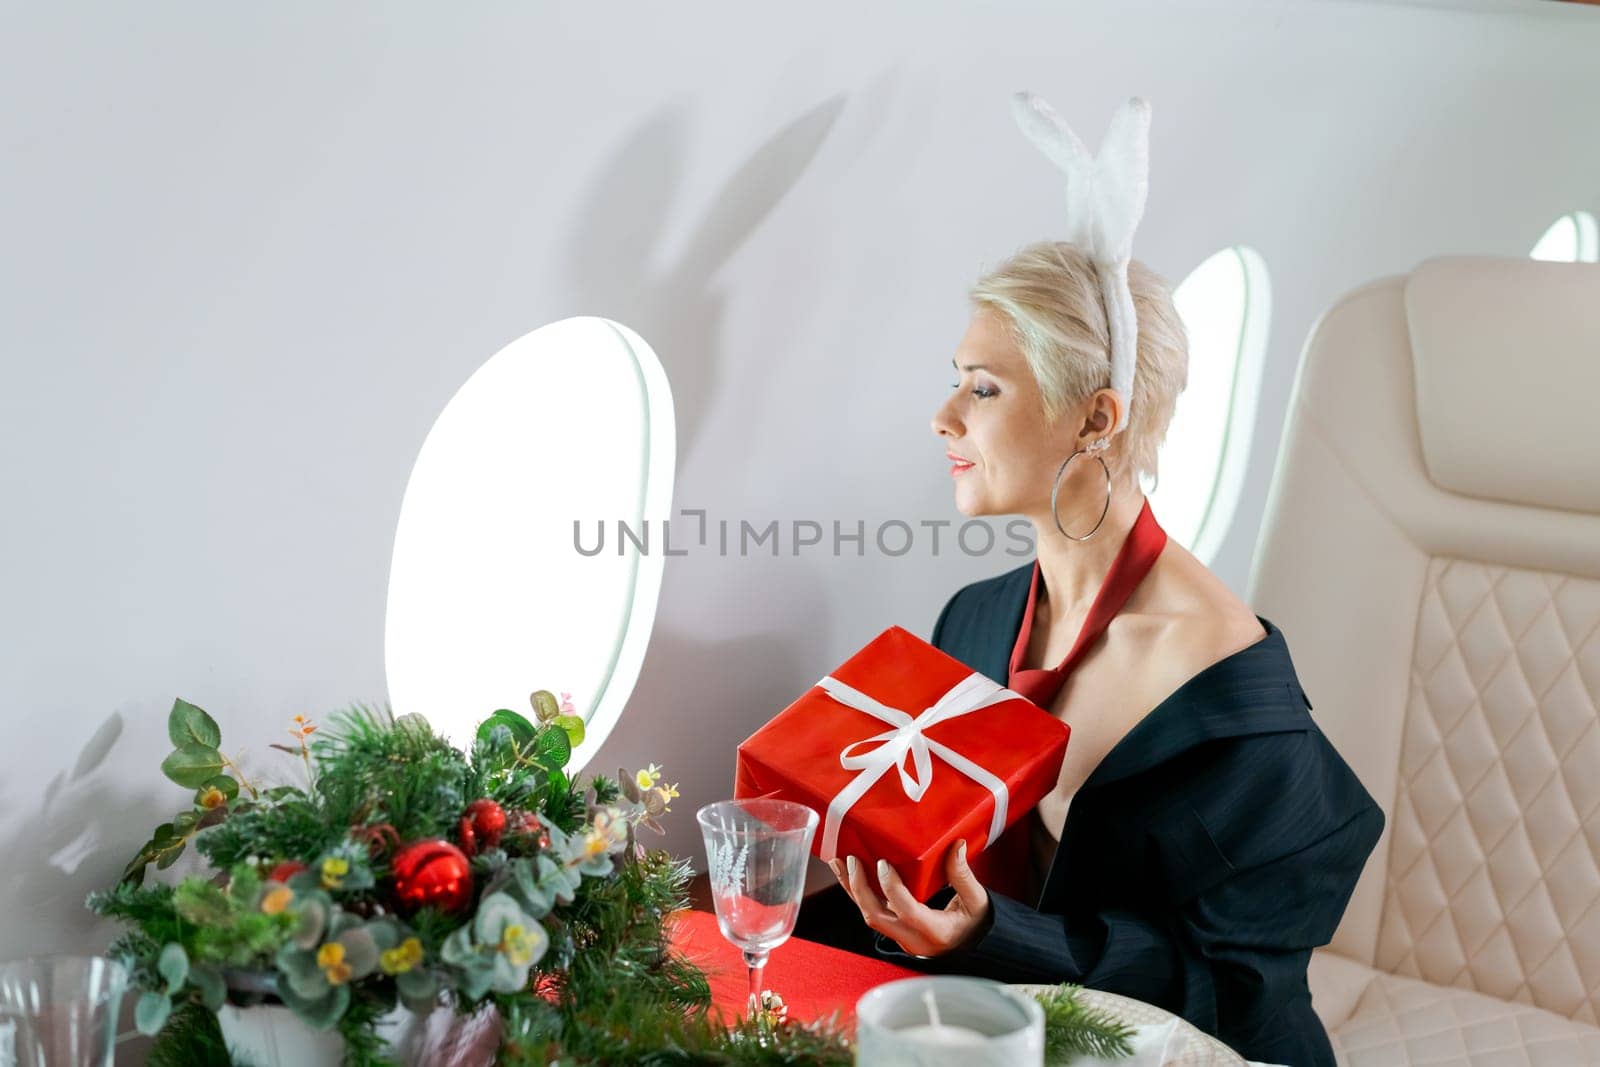 Woman private plane in a jacket with a red tie, New Year's Eve flight, holiday and travel concept by EkaterinaPereslavtseva